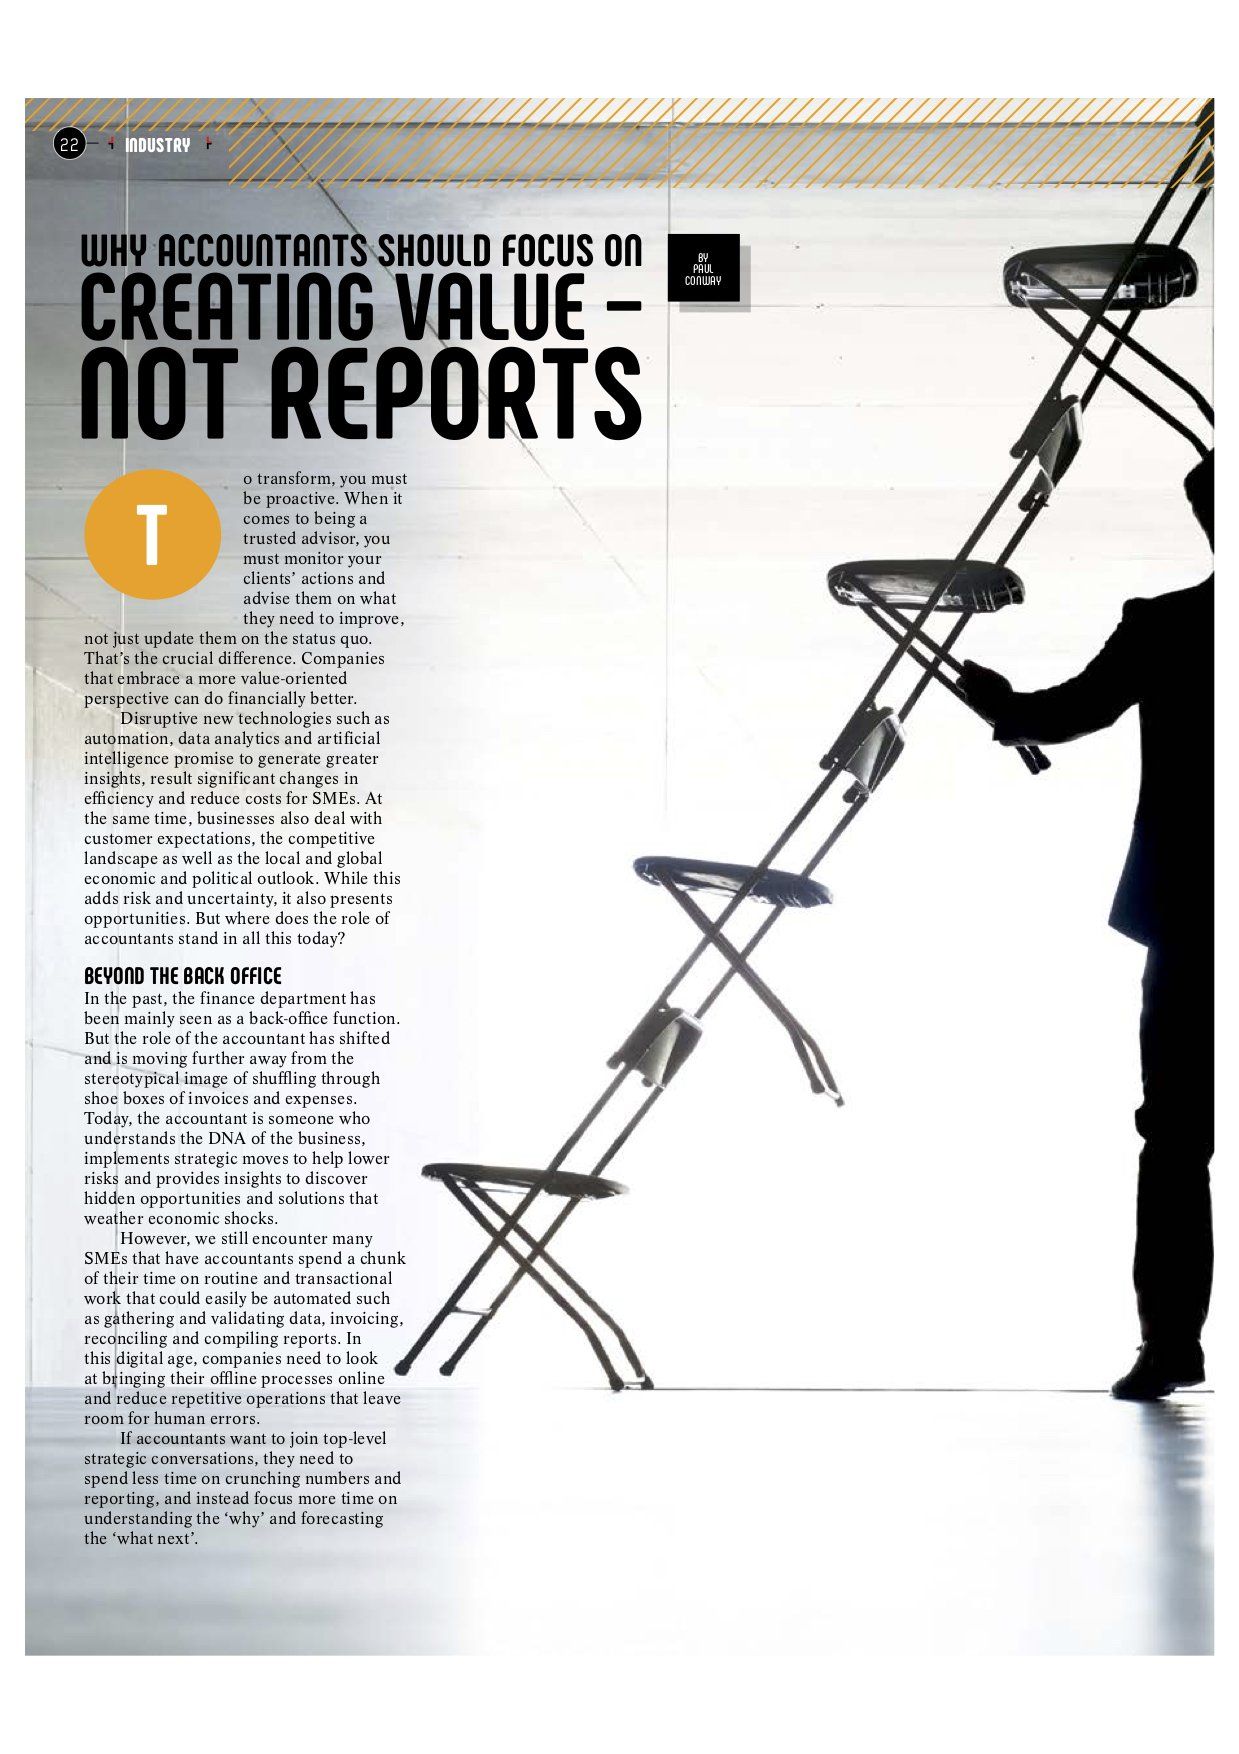 Why accountants should focus on creating value - not reports